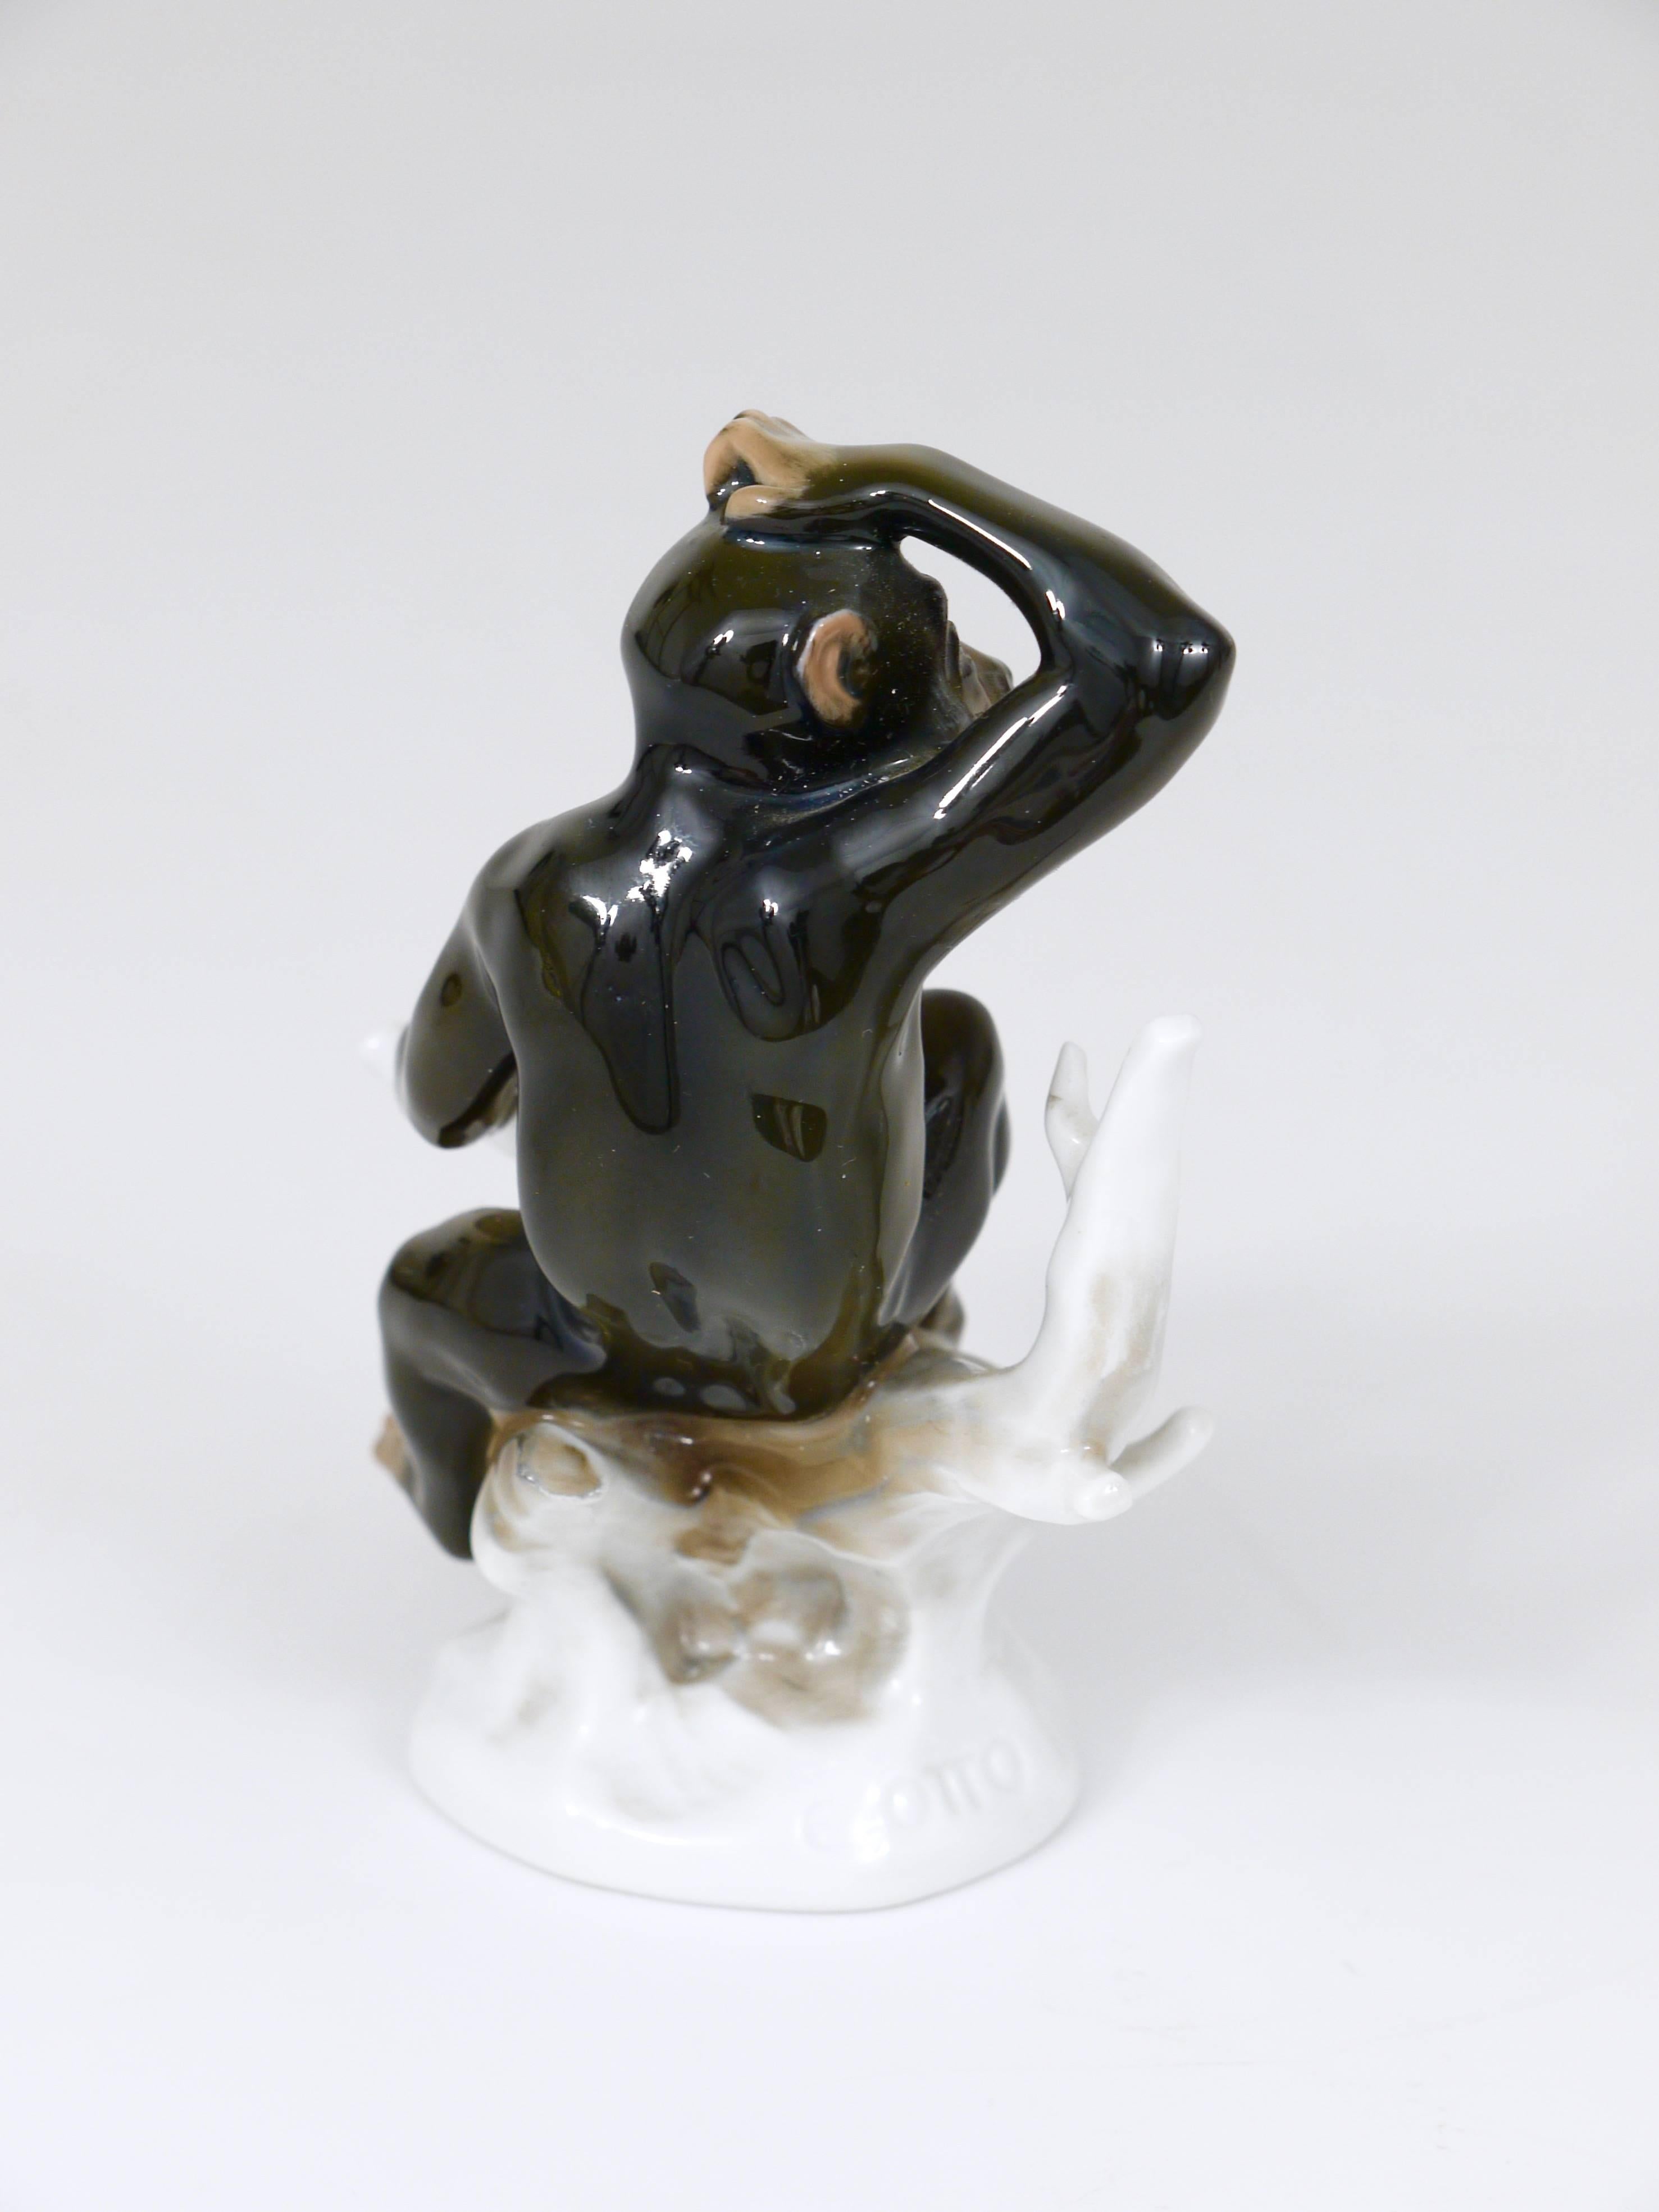 An unusual porcelain figurine displaying a chimpanzee sitting on a tree branch. This figurine was designed by Otto Eichwald and manufactured in the 1920s by Rosenthal Germany, Kunstabteilung Selb. In excellent condition. 

